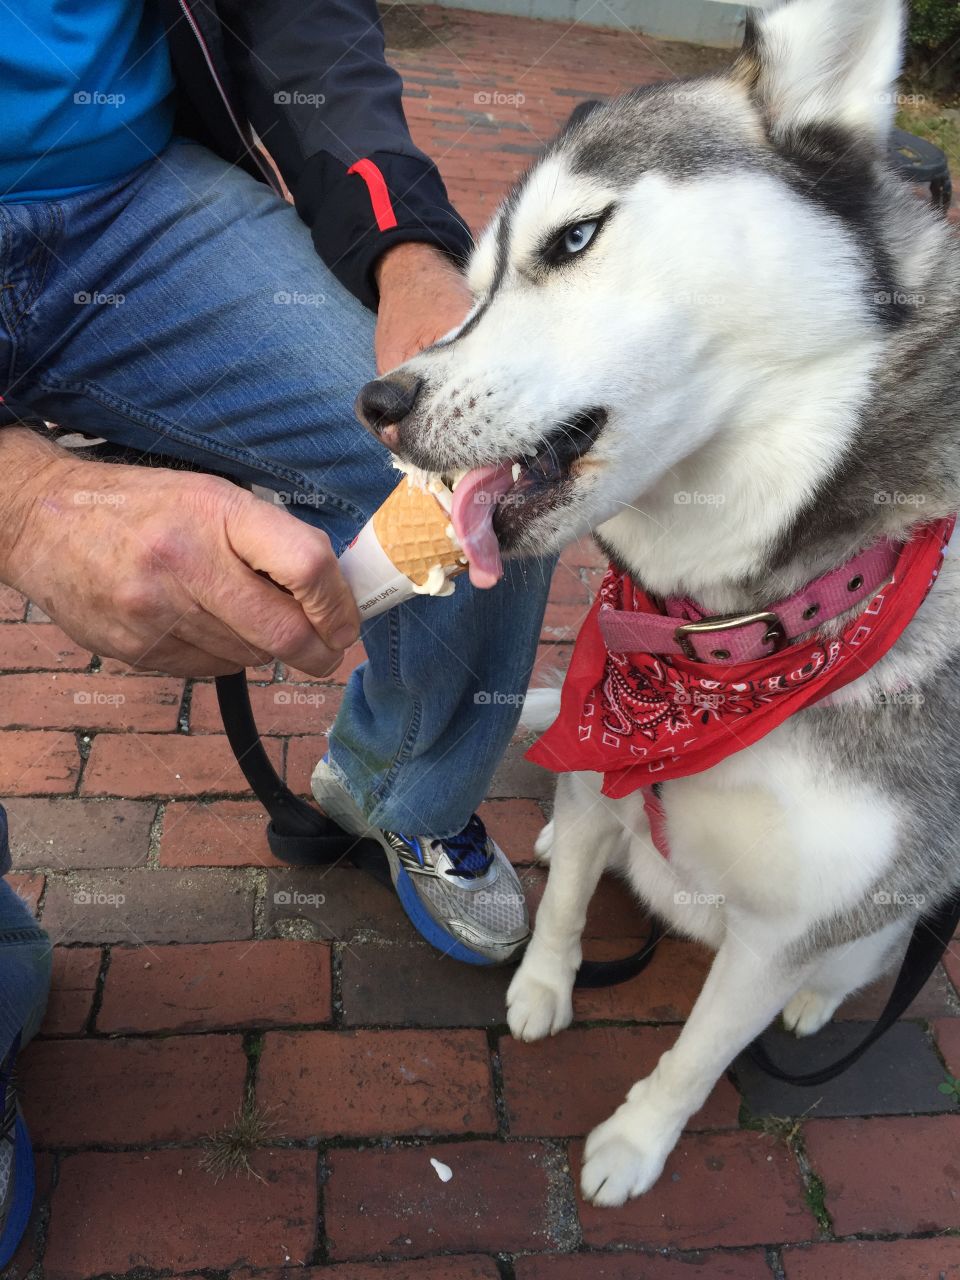 Dogs day out...l just wove ice cream...